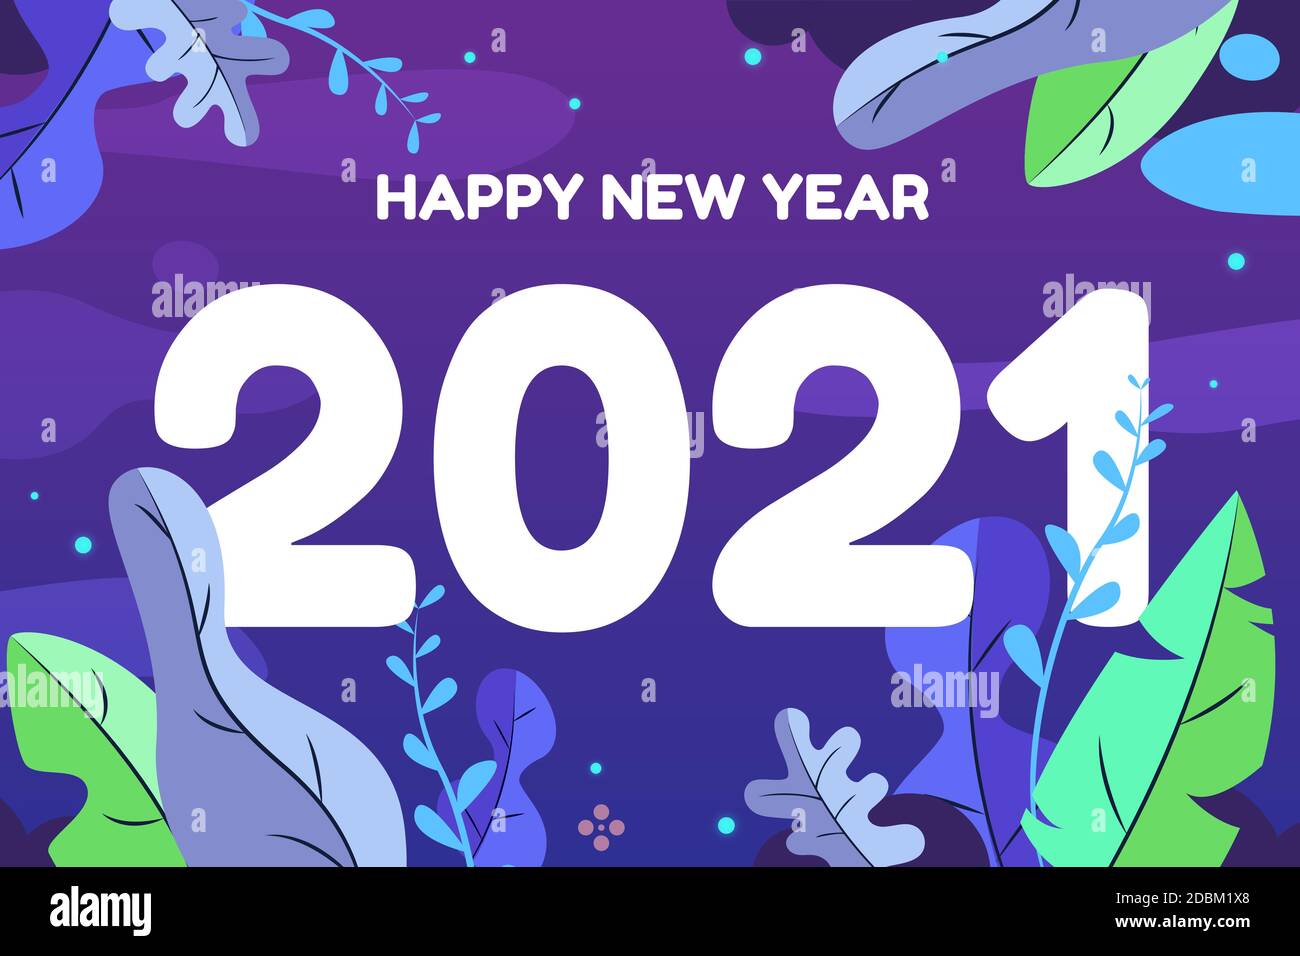 Happy new year 2021 for holidays banners. Flyers, greetings, invitations, Vector illustration. Stock Vector